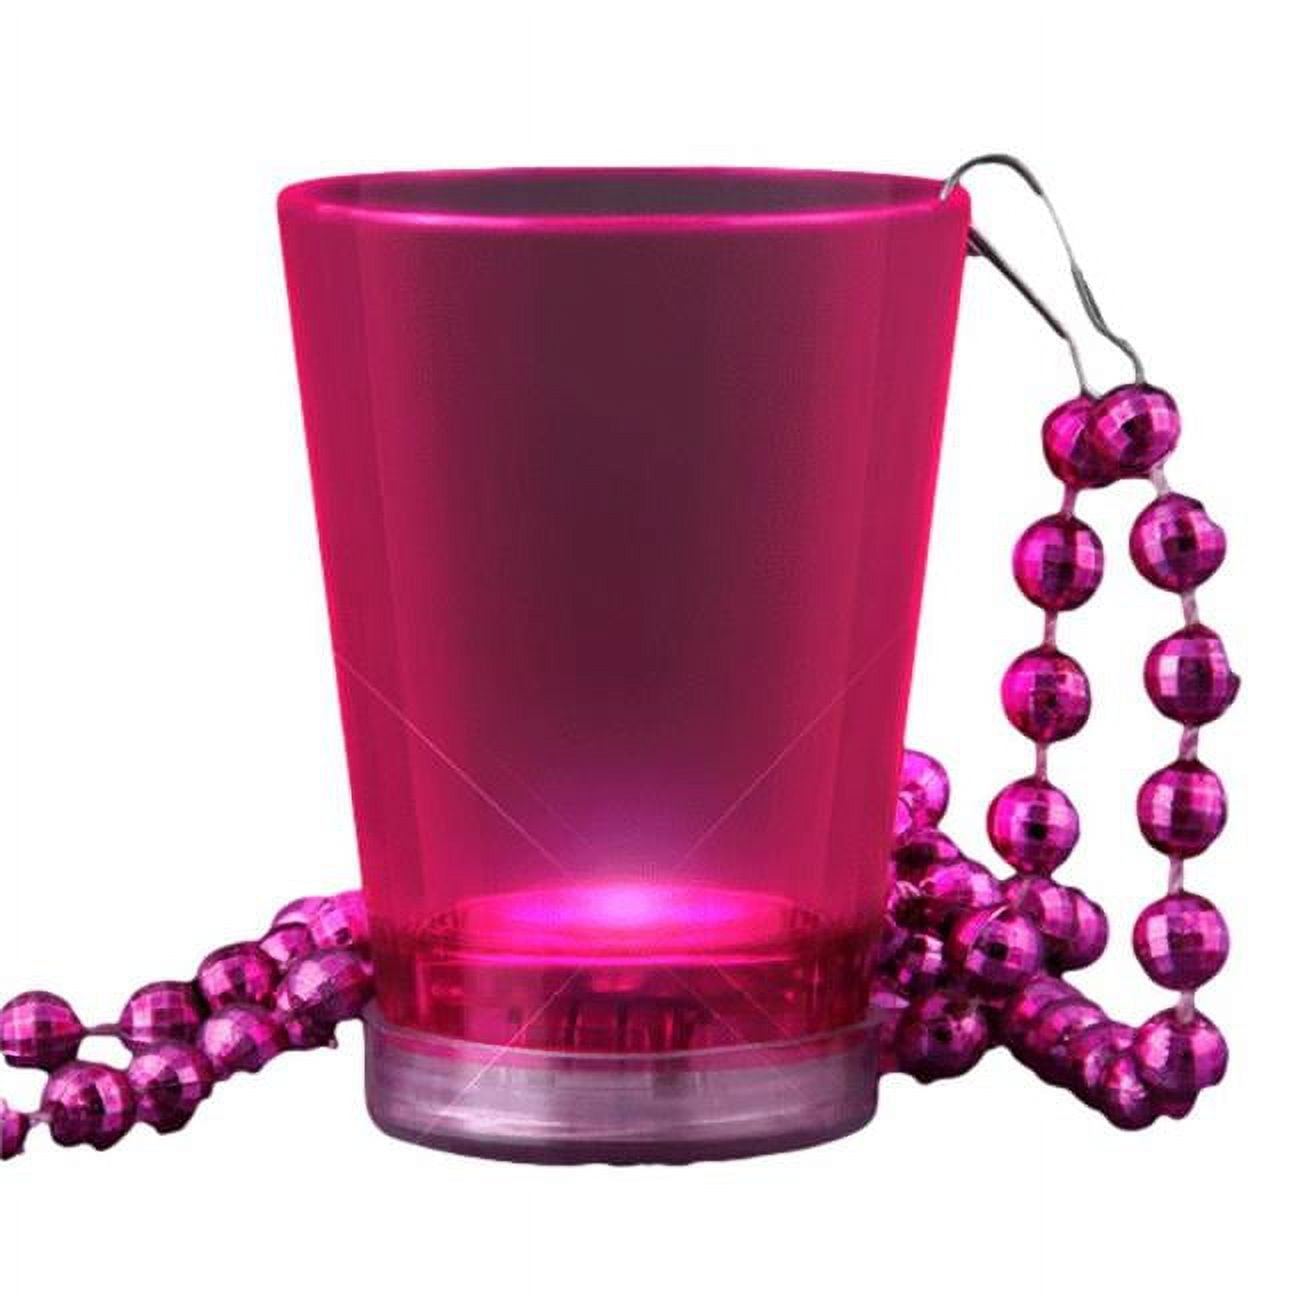 Picture of Blinkee LUPSHPBNL-PK Light Up Pink Shot Glass on Pink Beaded Necklaces